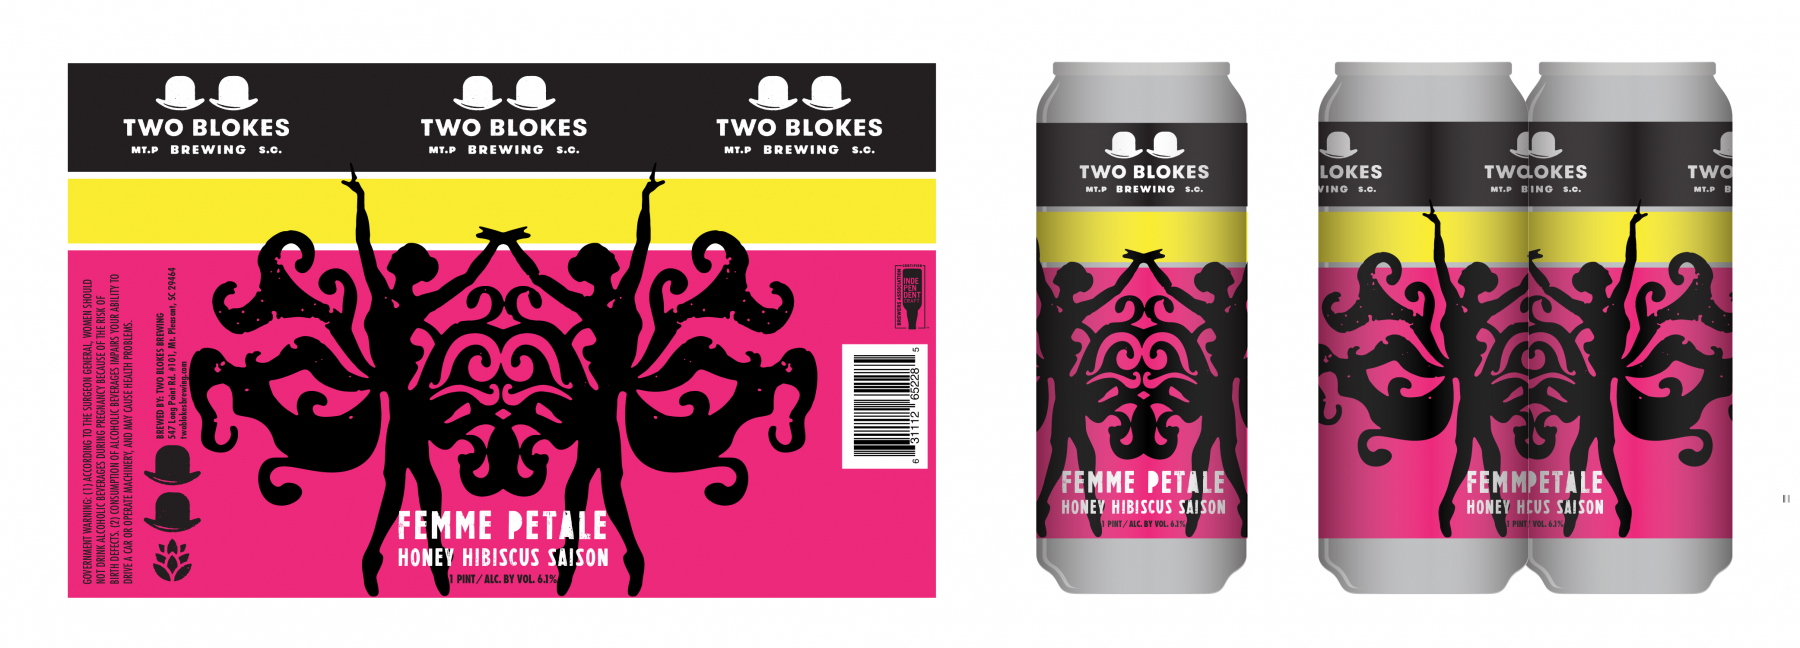 Two Blokes Brewing Co.